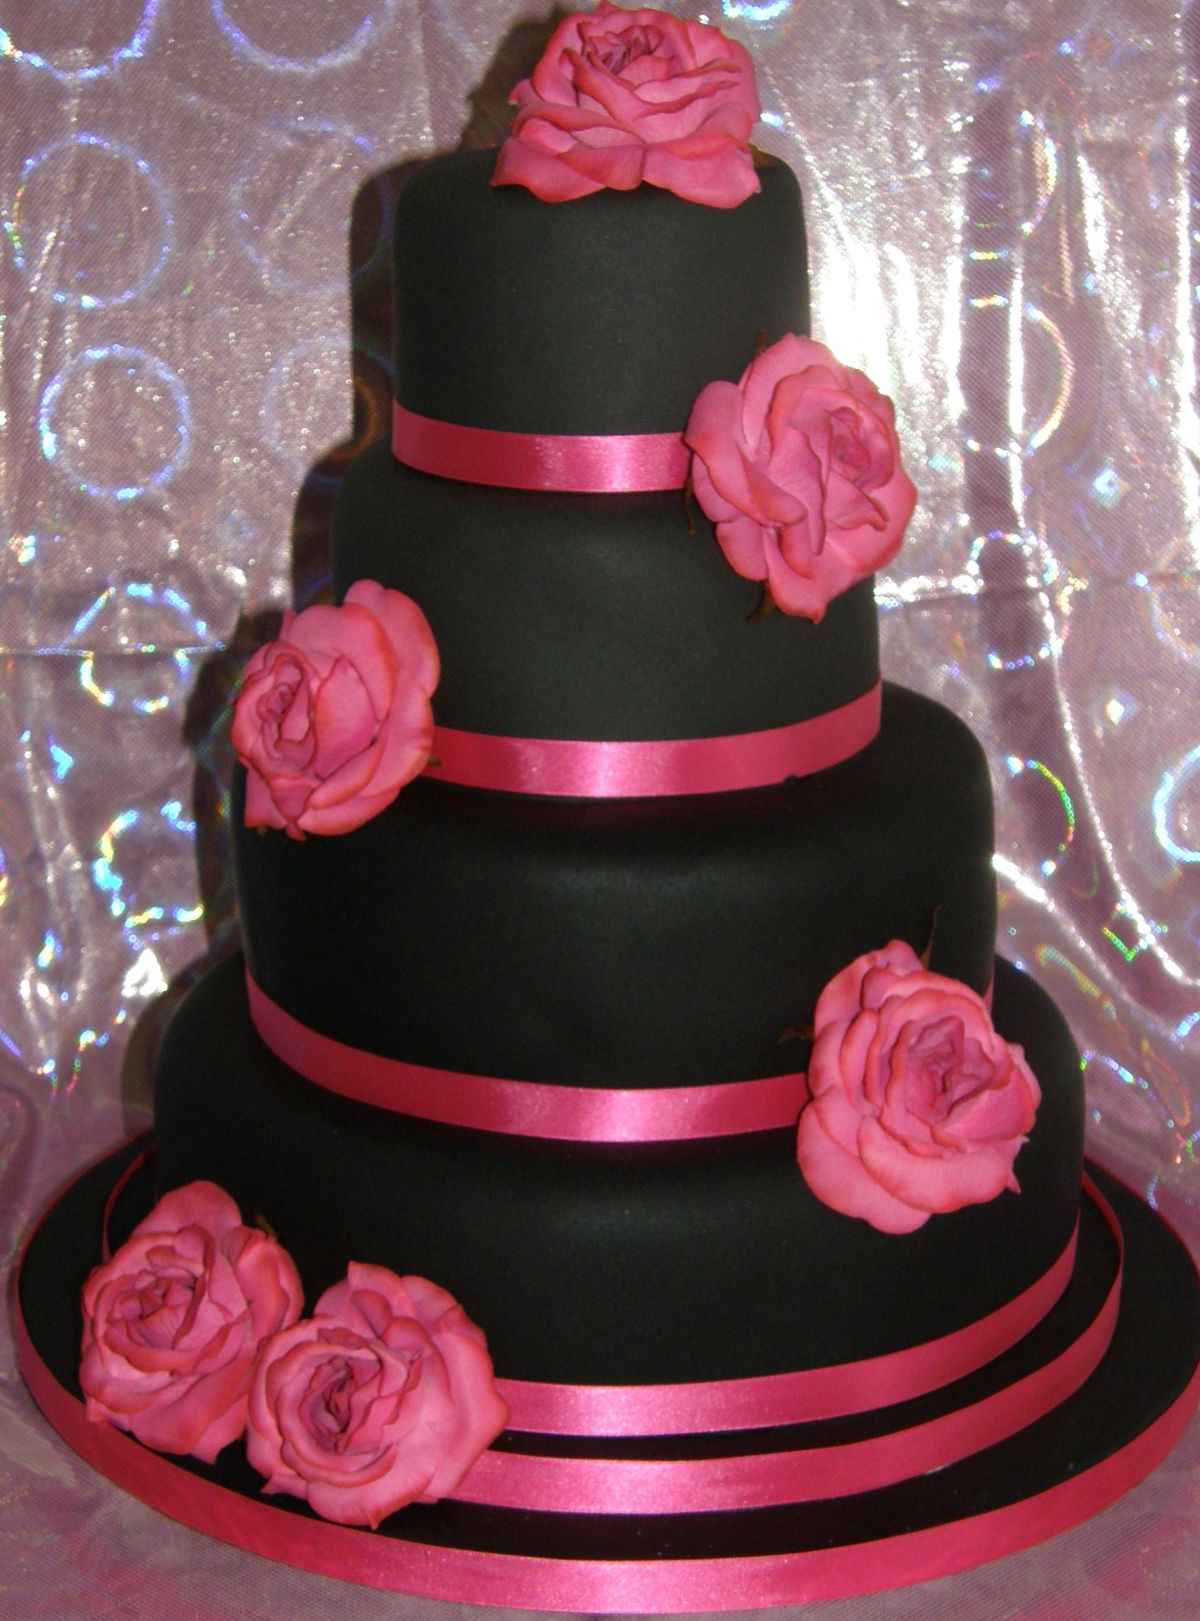 Cakes Unlimited of Yorkshire-Image-62